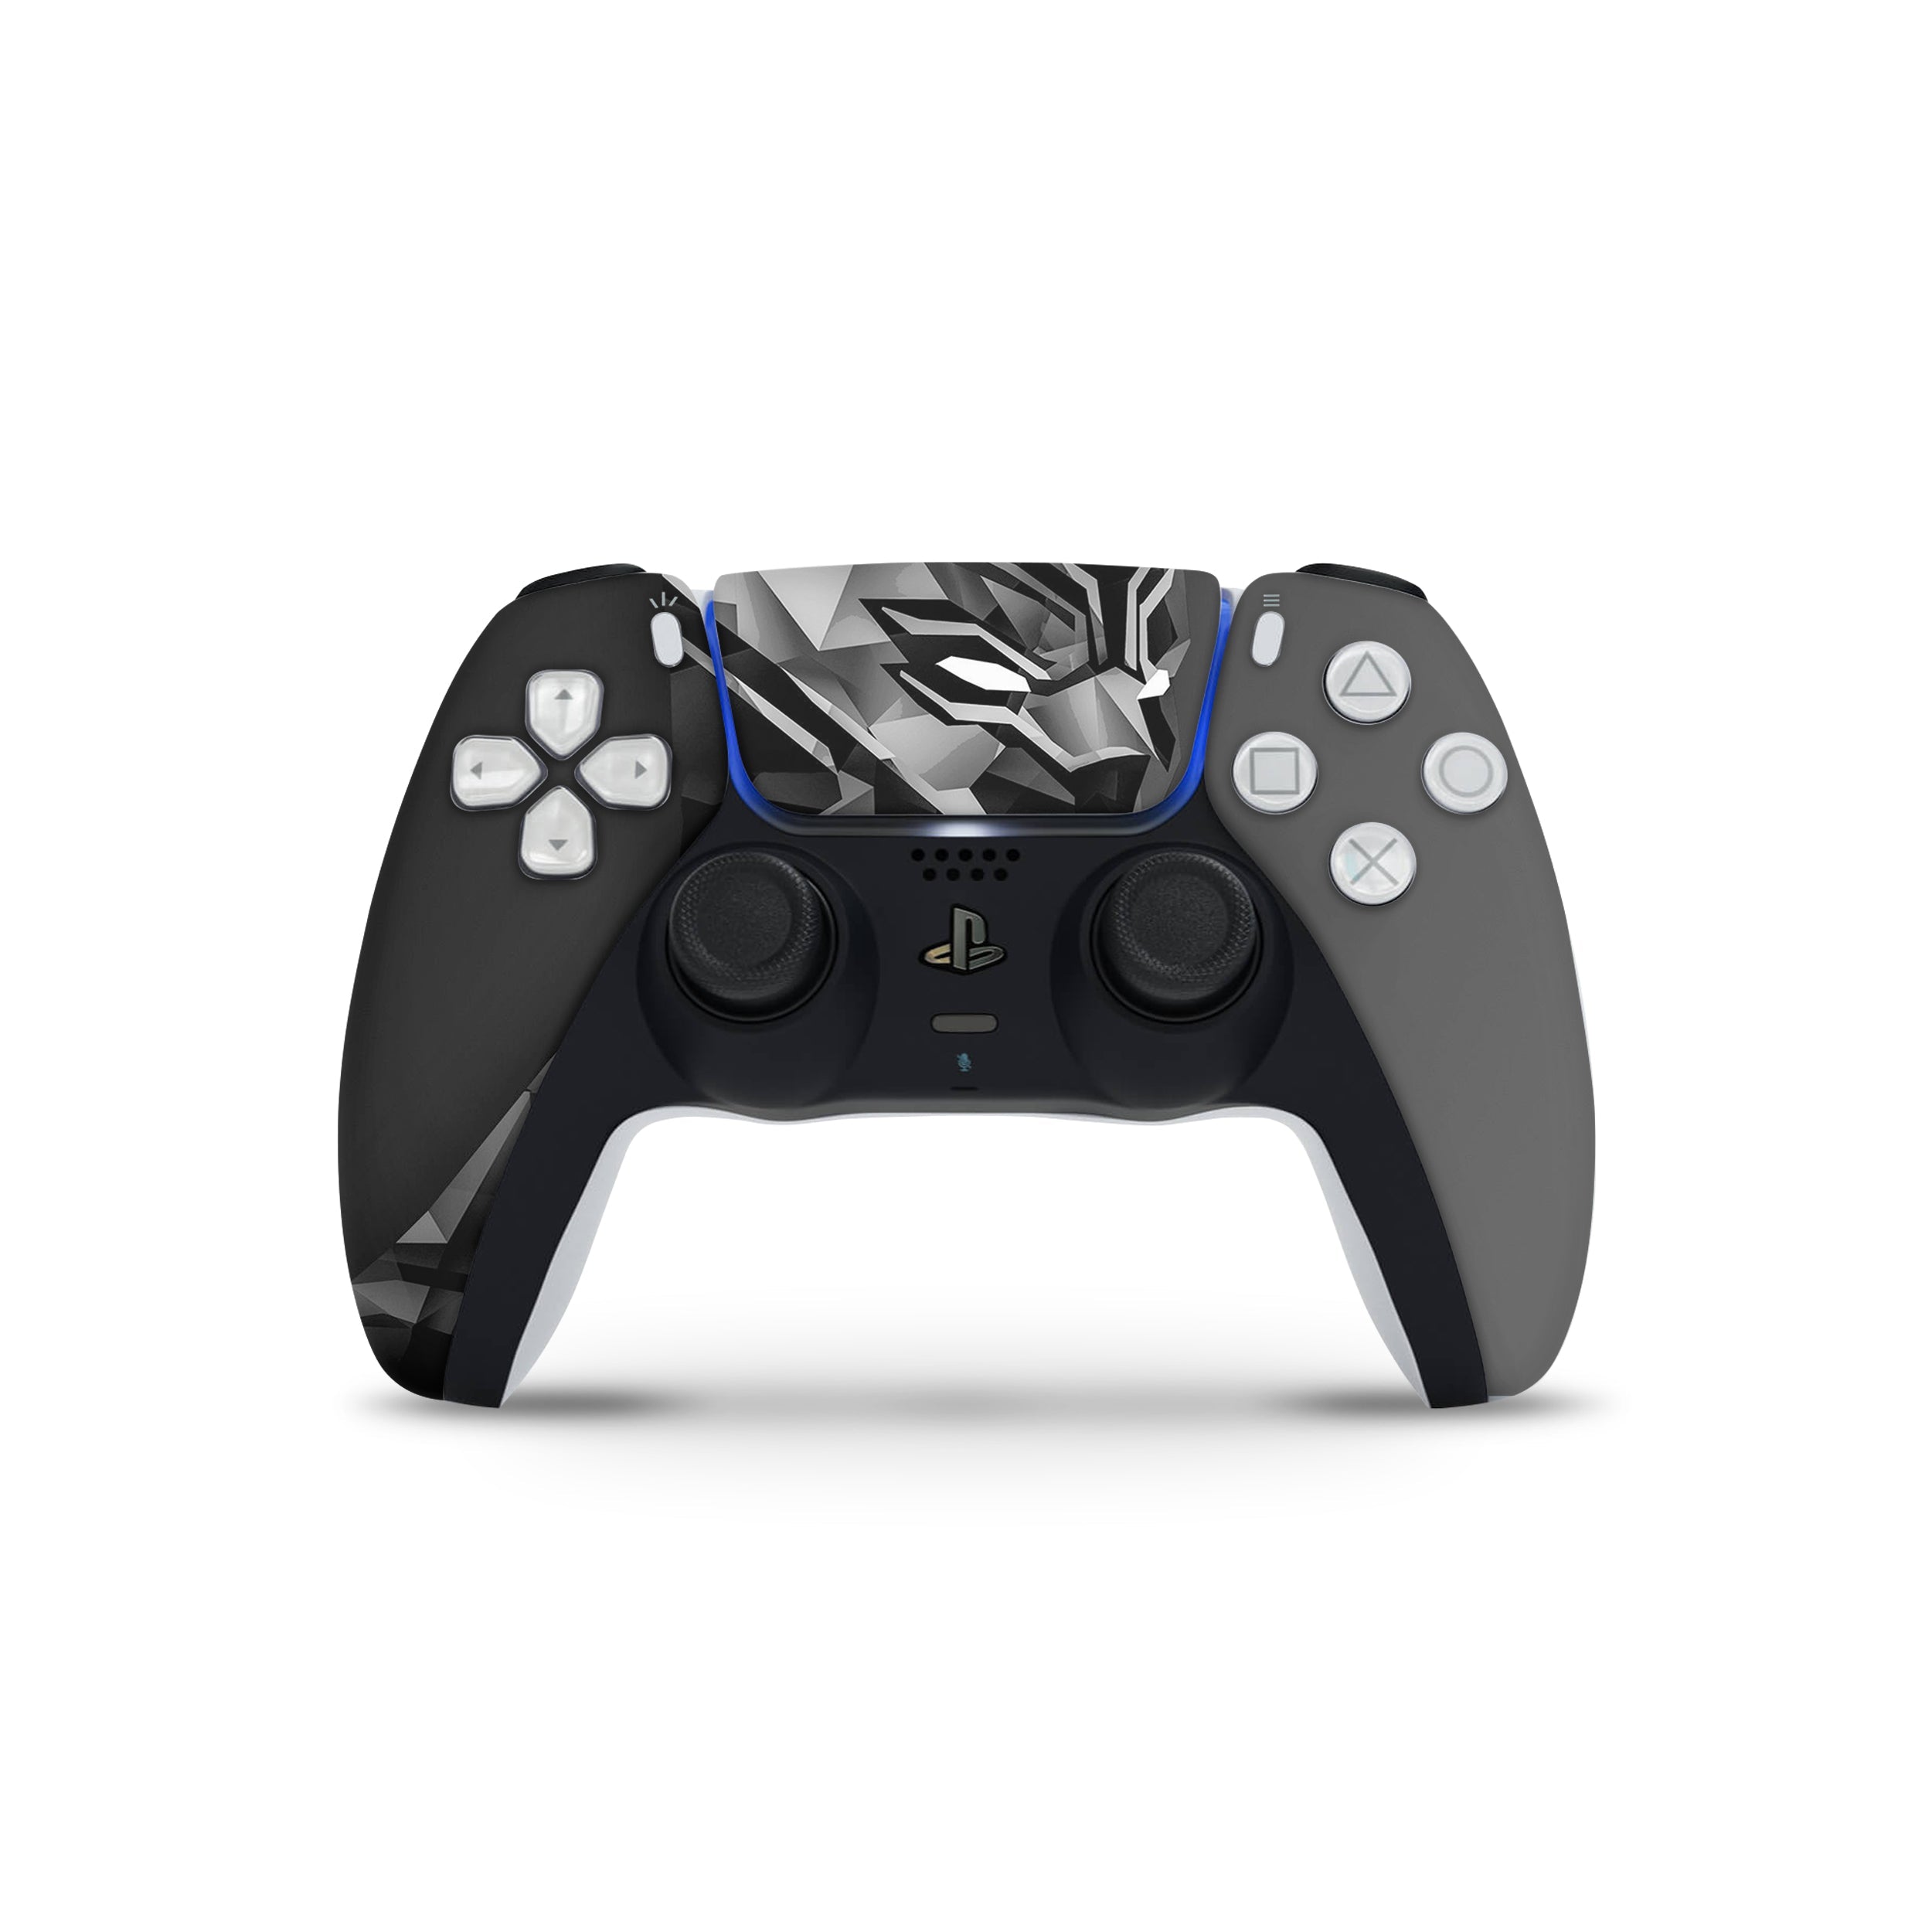 A video game skin featuring a Marvel Comics Black Panther design for the PS5 DualSense Controller.